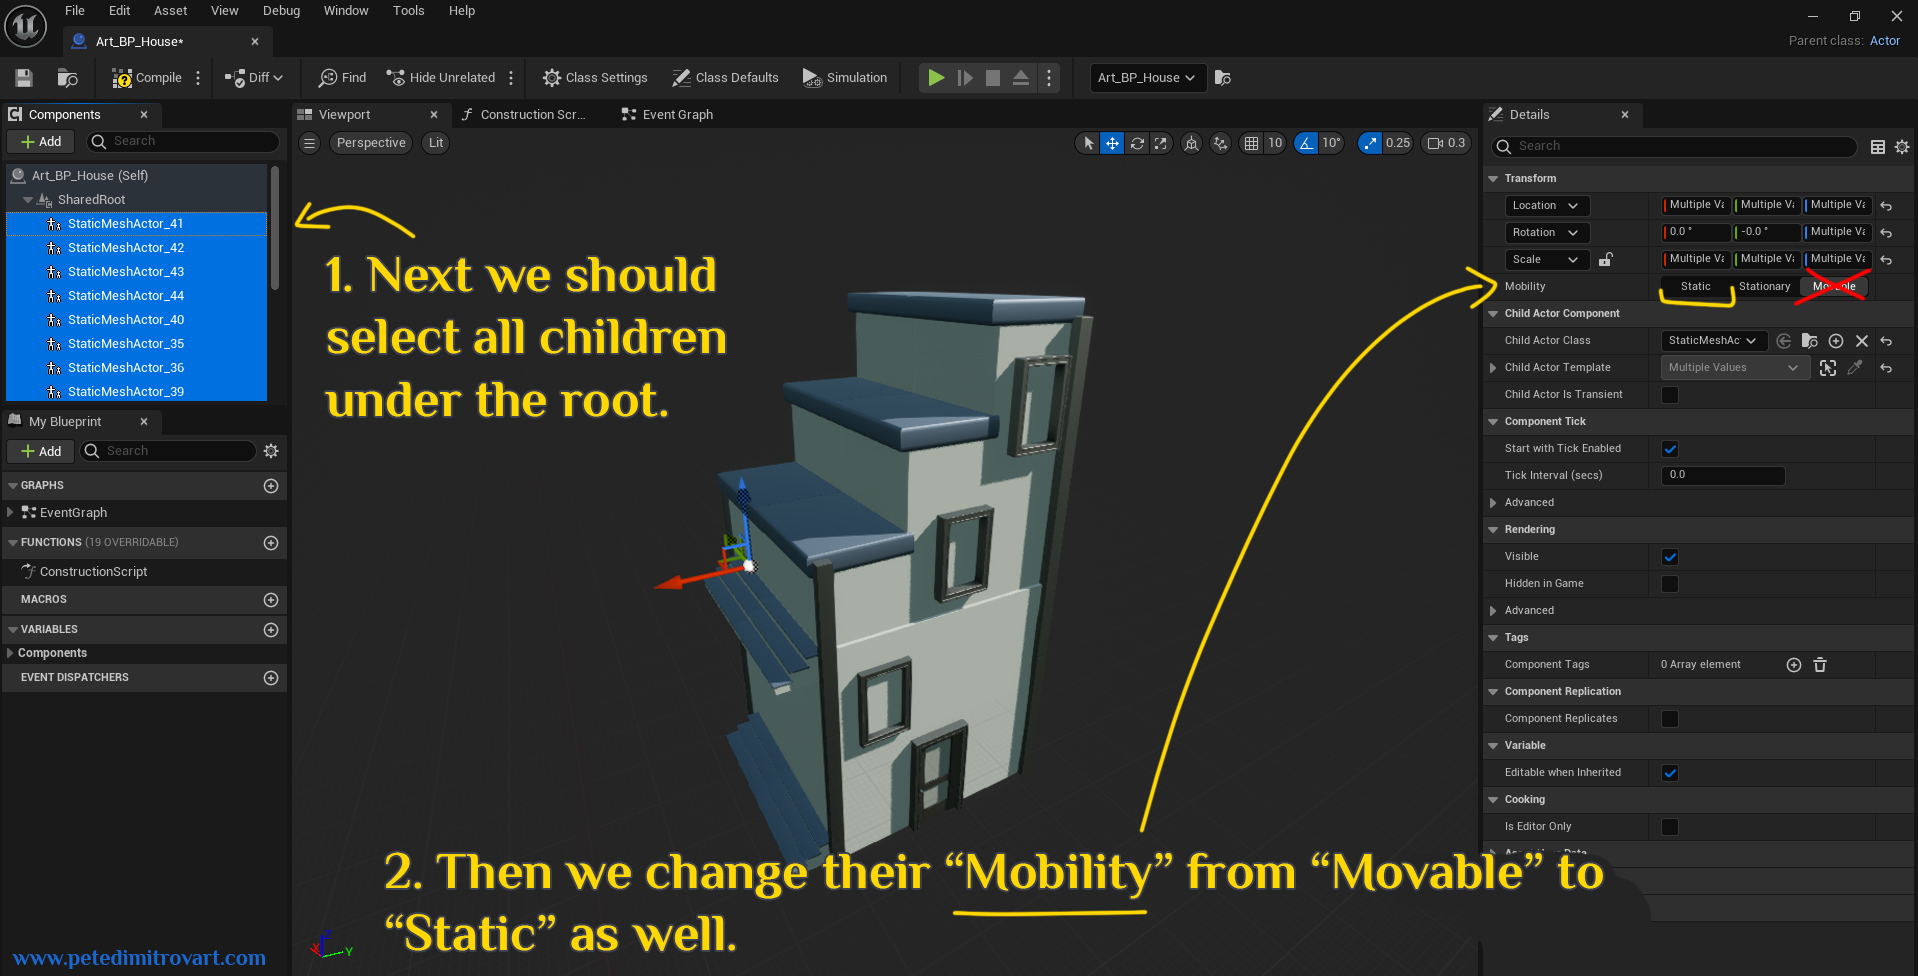 Another image from the same blueprint. On the left side, in the “Components” window, in blue are selected lots of children static meshes. Another arrow on the right hand side points again to “Mobility” this time of the selected many children assets. Yellow text is described below.